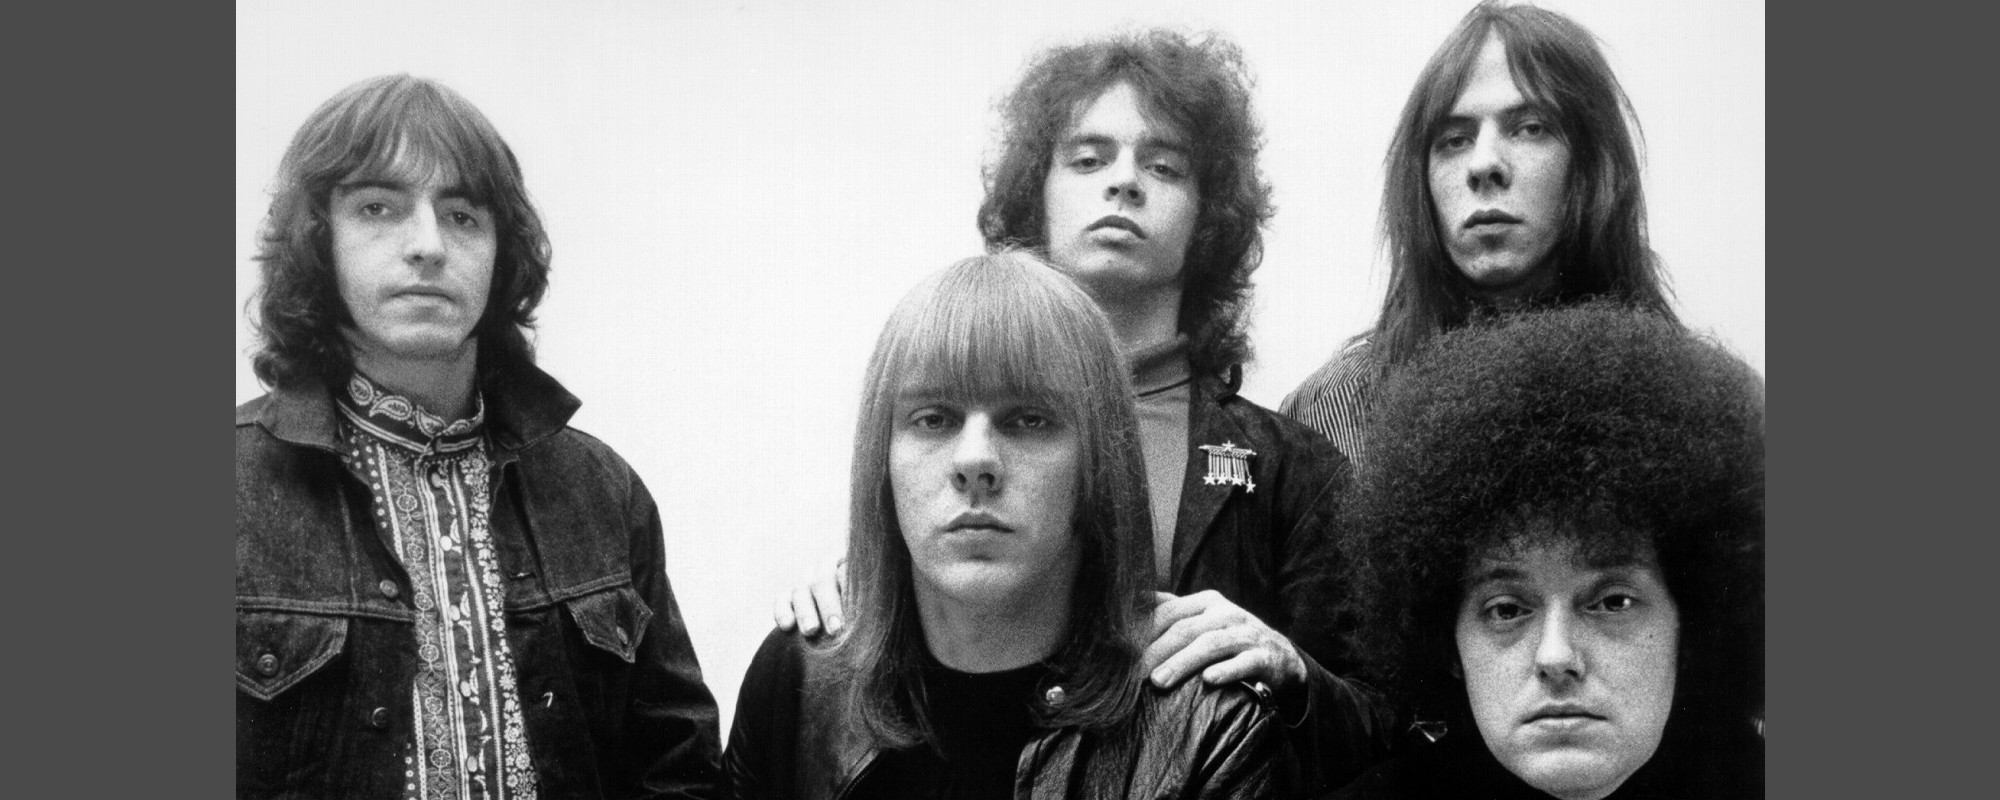 MC5 Drummer Dennis Thompson, the Band’s Last Surviving Original Member, Has Died at Age 75